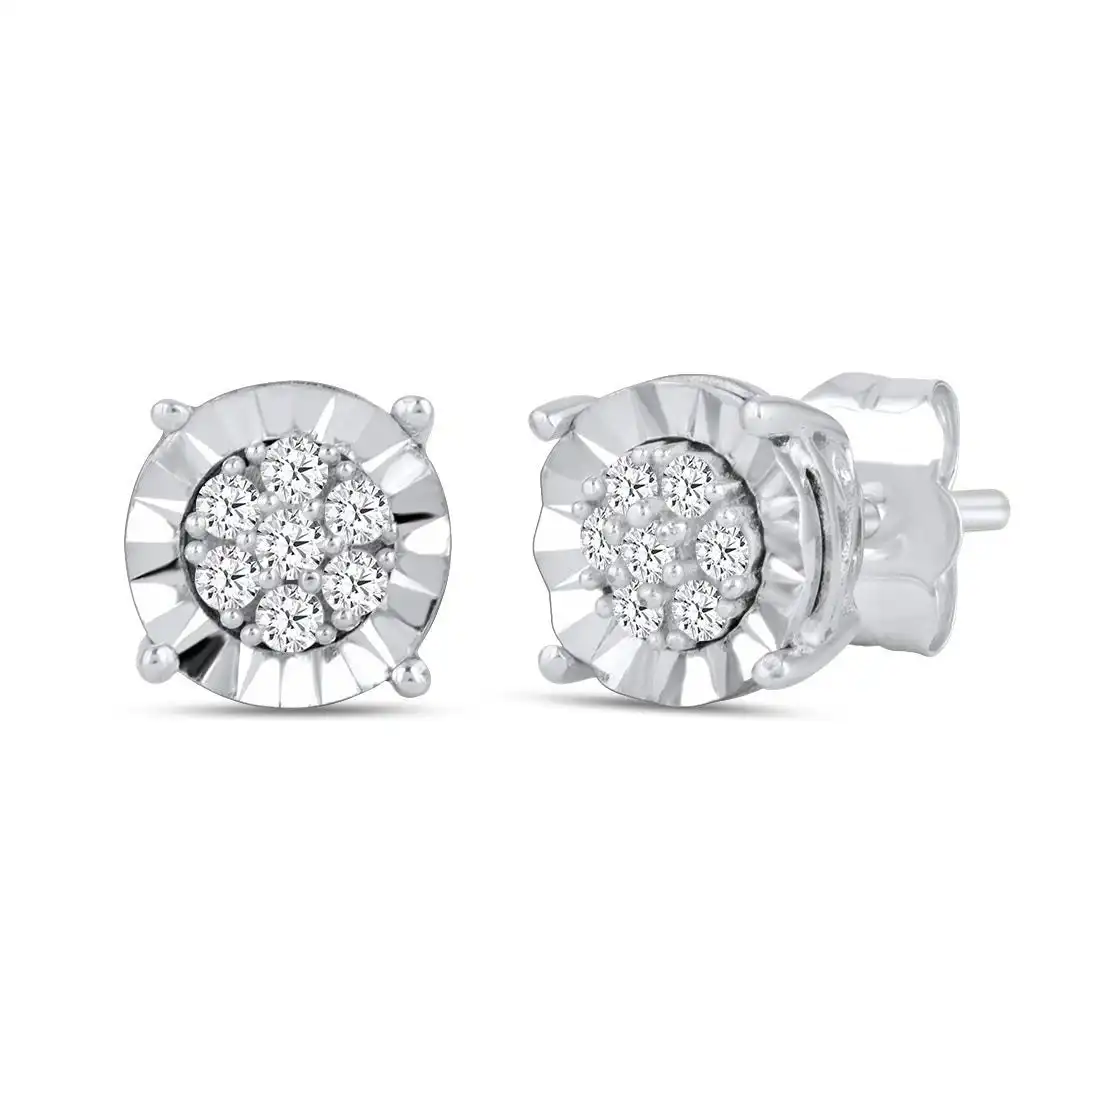 Tia Miracle Halo Stud Earrings with 0.20ct of Diamonds in 9ct White Gold